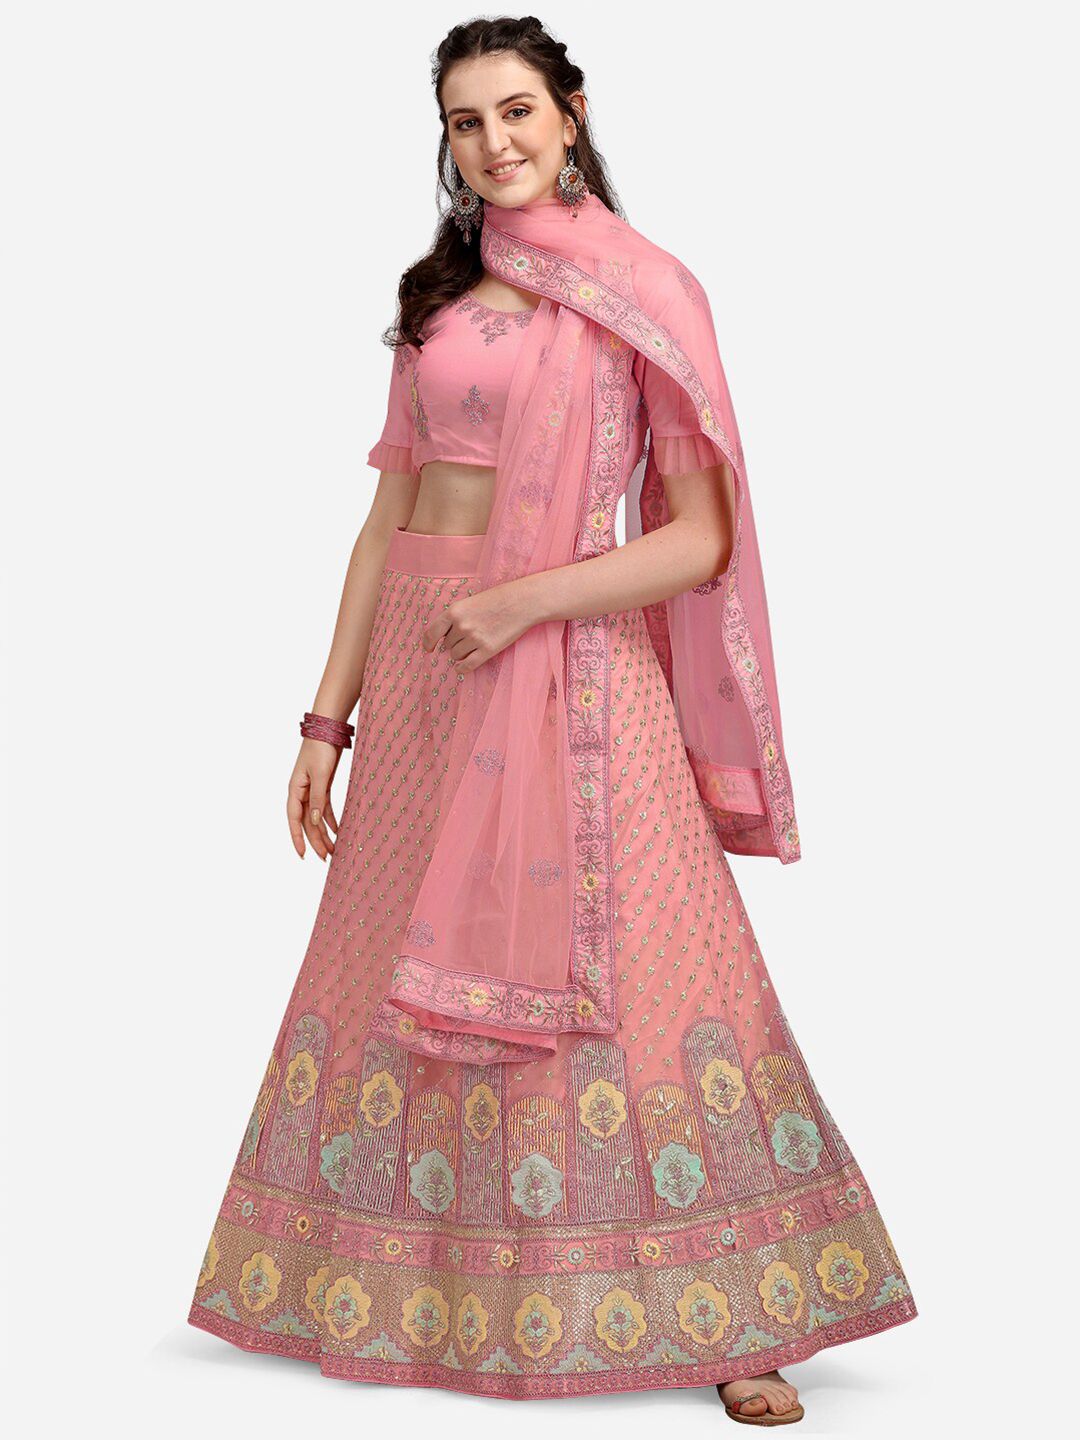 V SALES Pink Embroidered Semi-Stitched Lehenga Choli With Dupatta Price in India